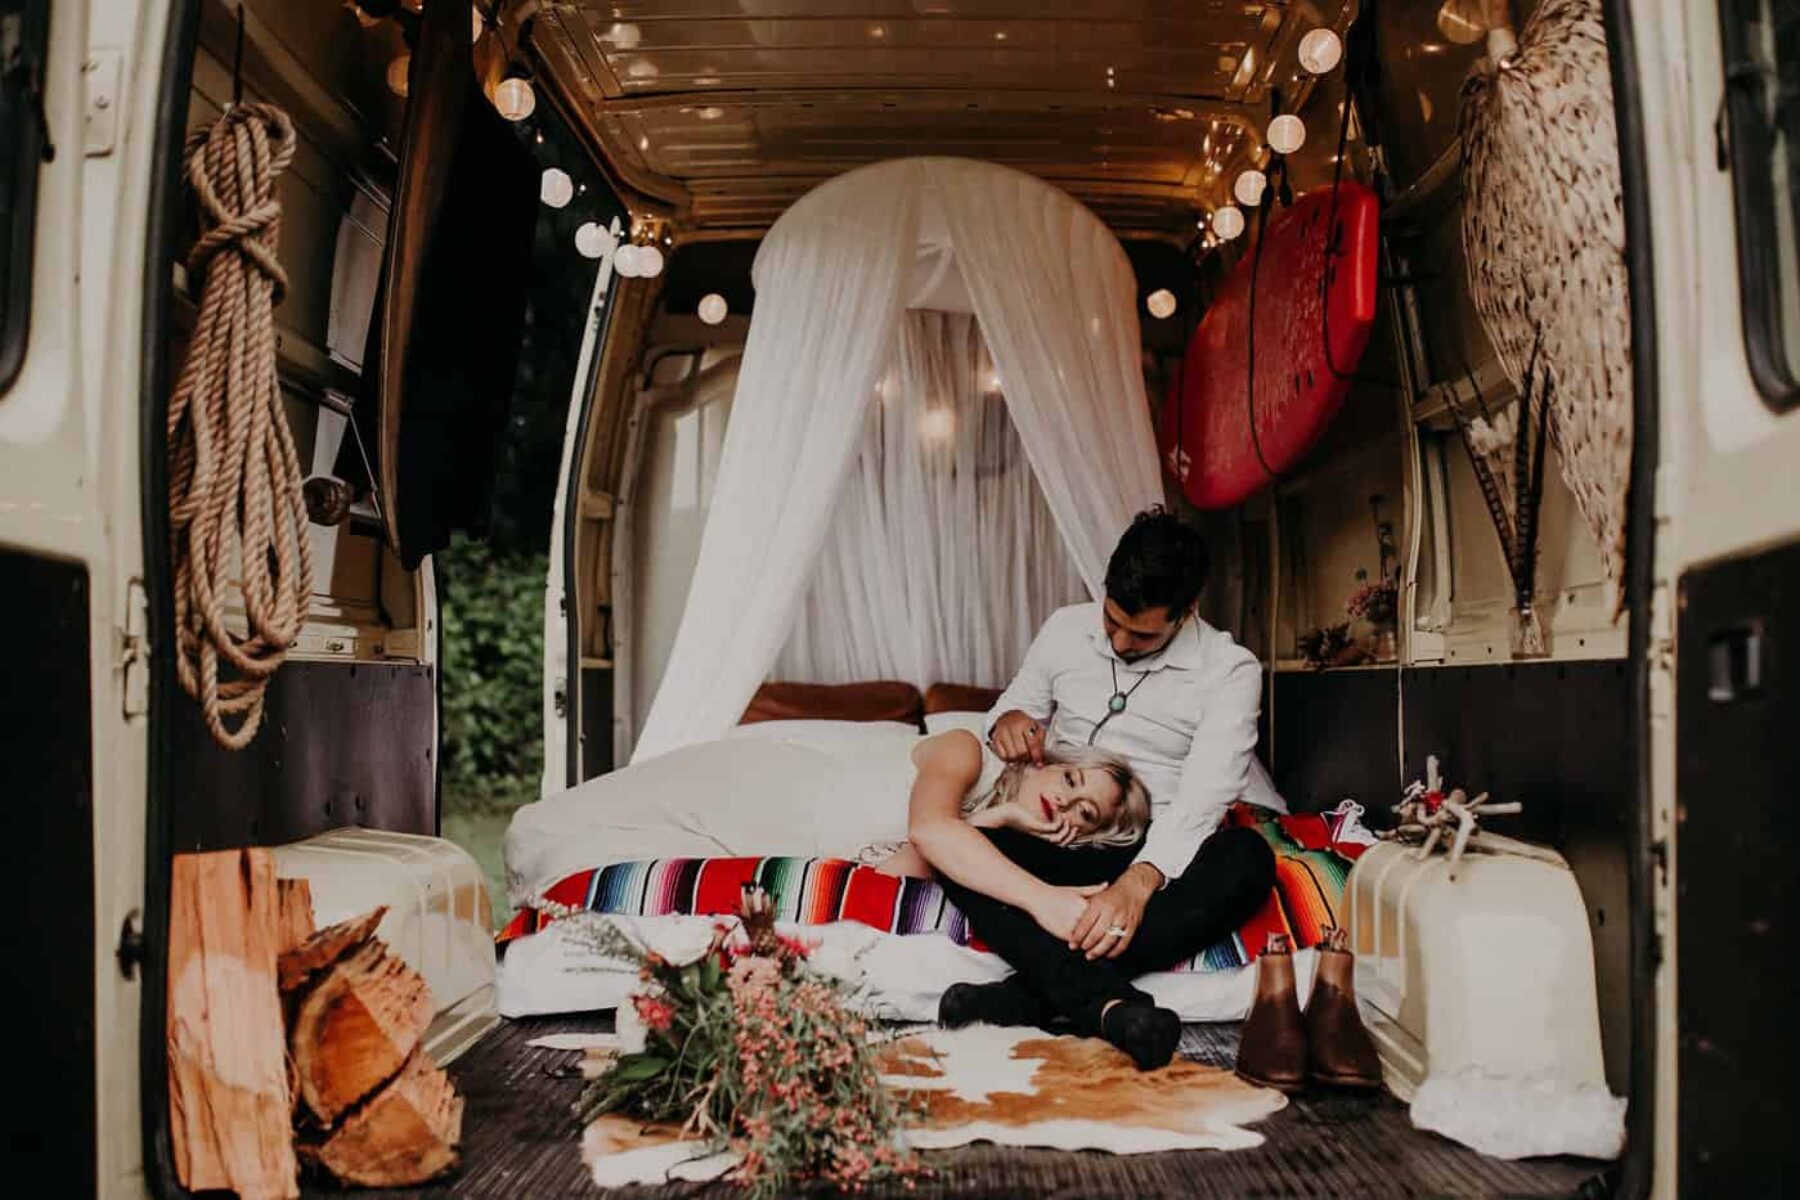 nomadic boho elopement with yurt tent and campervan